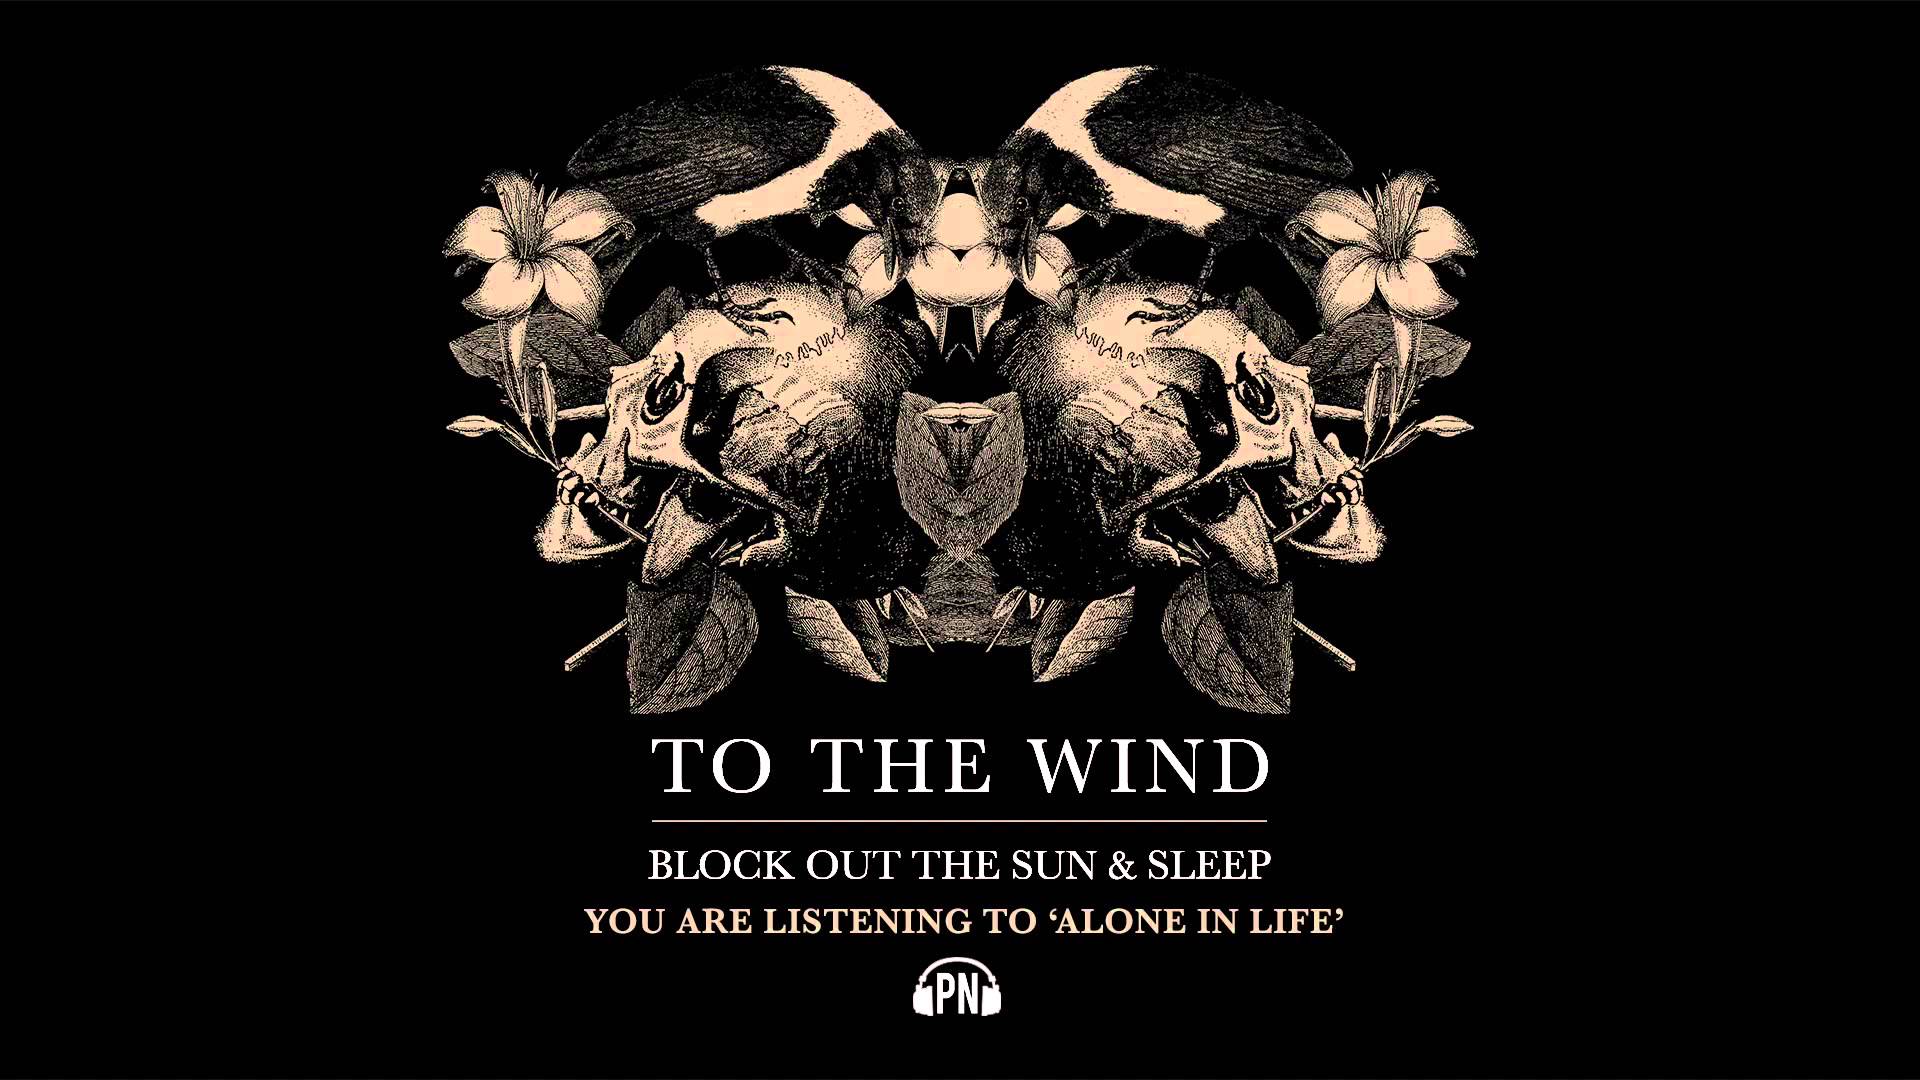 block out the sun and sleep torrent